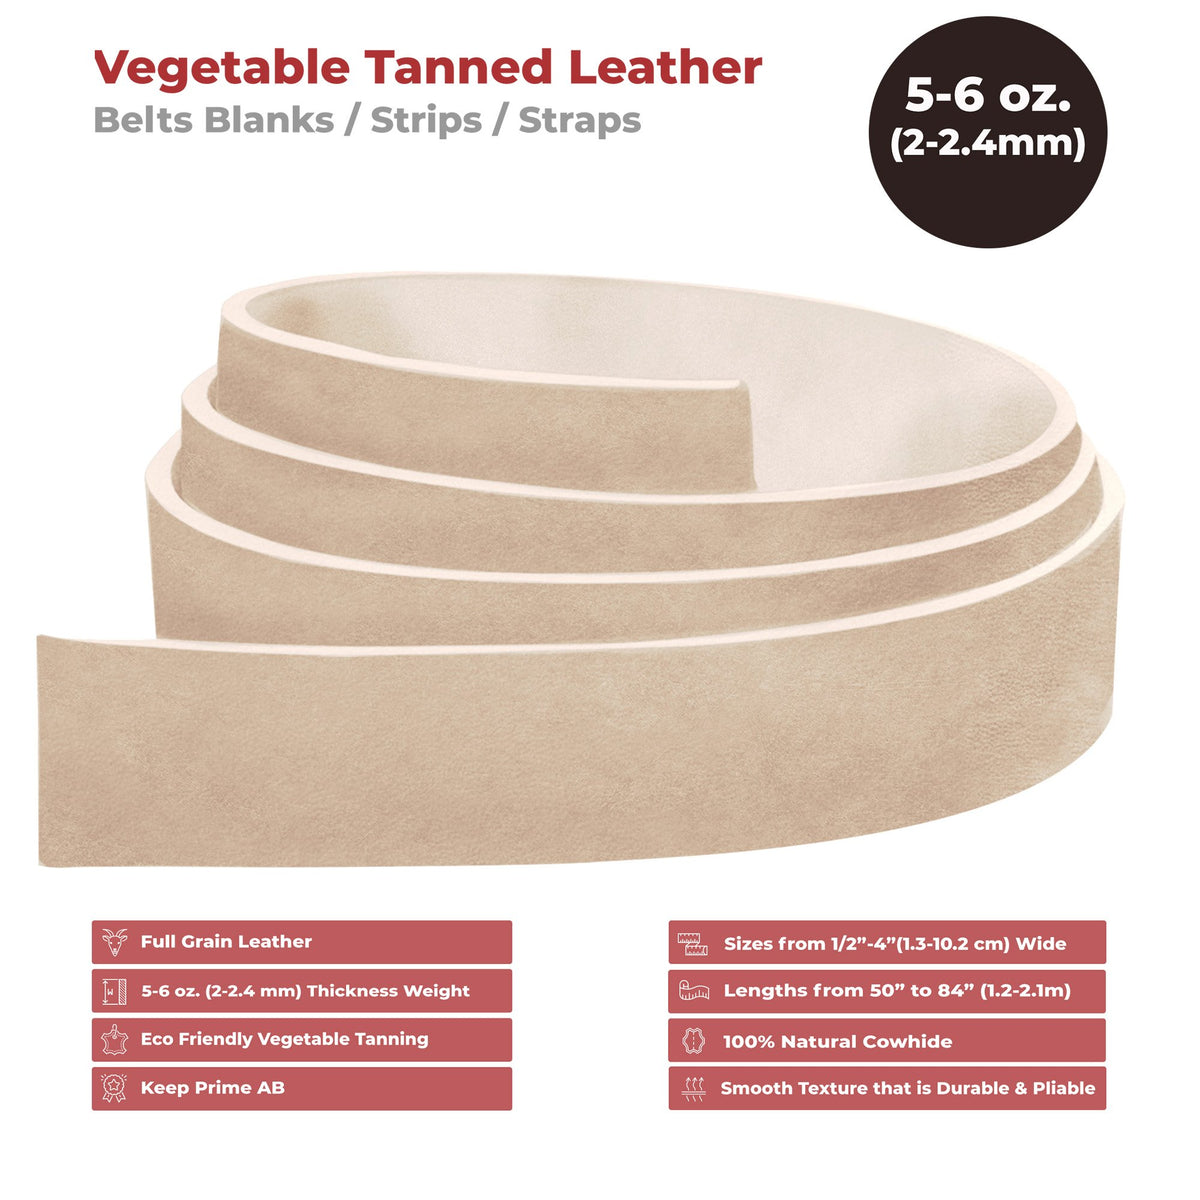 ELW 4-6 oz. 1.8-2.4mm Thickness, 1 LB Vegetable Tanned Leather